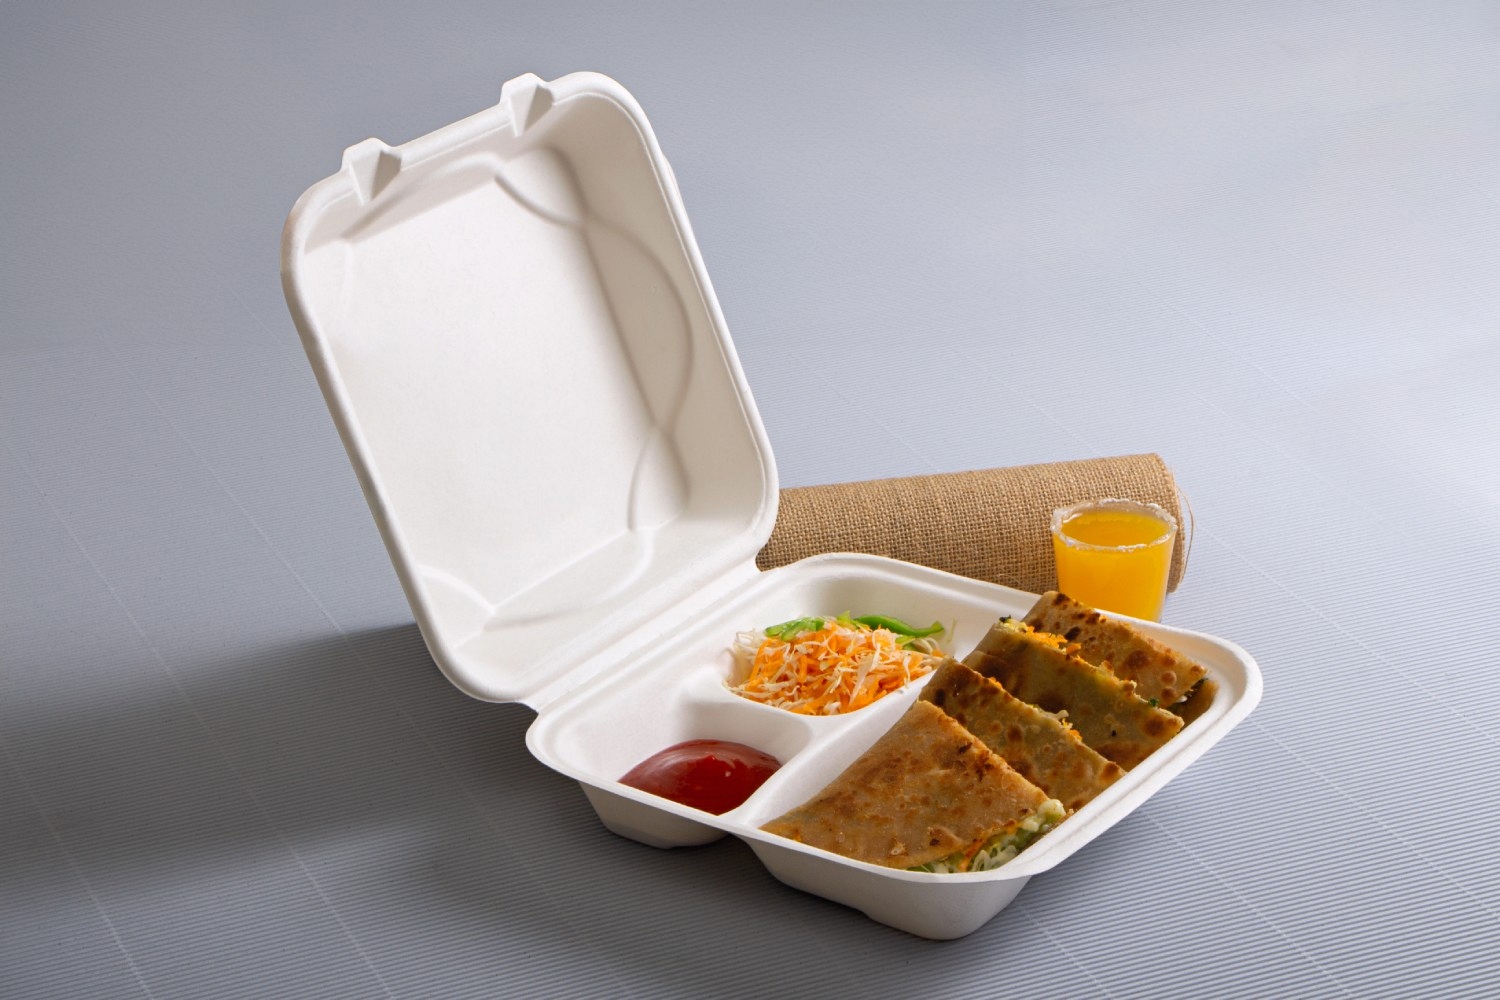 3 Compartments 9" Sugarcane Bagasse Takeout Box with Hinged Lid container - Ecolates